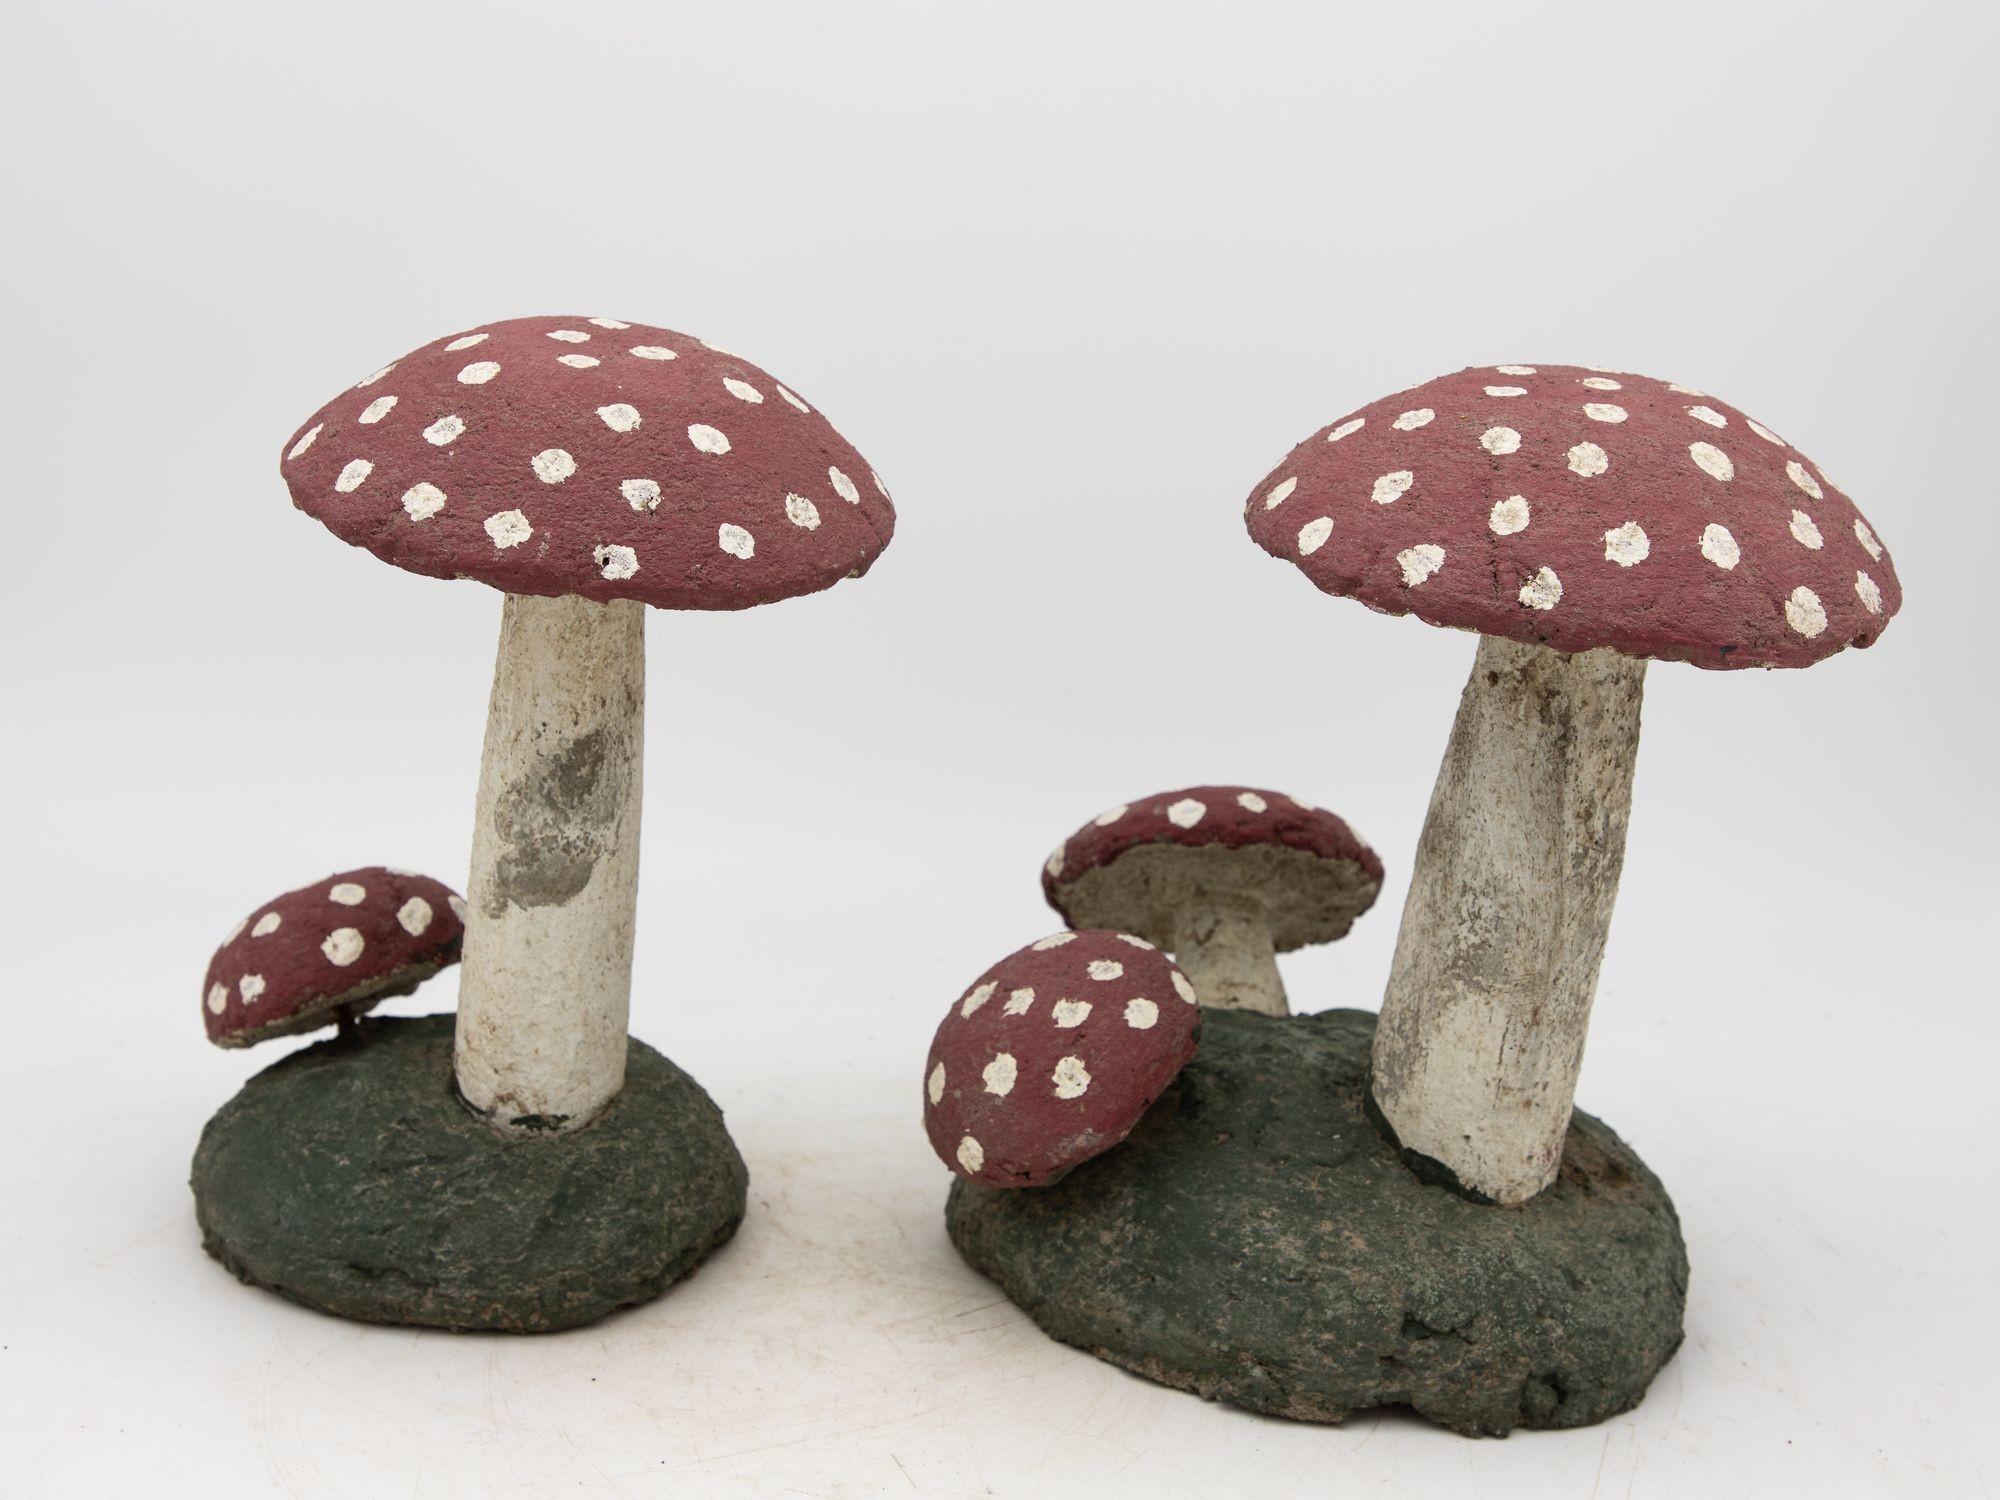 This charming pair of vintage painted stone toadstools hails from mid-20th century Belgium, epitomizing whimsical garden decor. Standing tall with painted red caps adorned with white spots, they exude a playful, fairytale-like allure. Crafted from